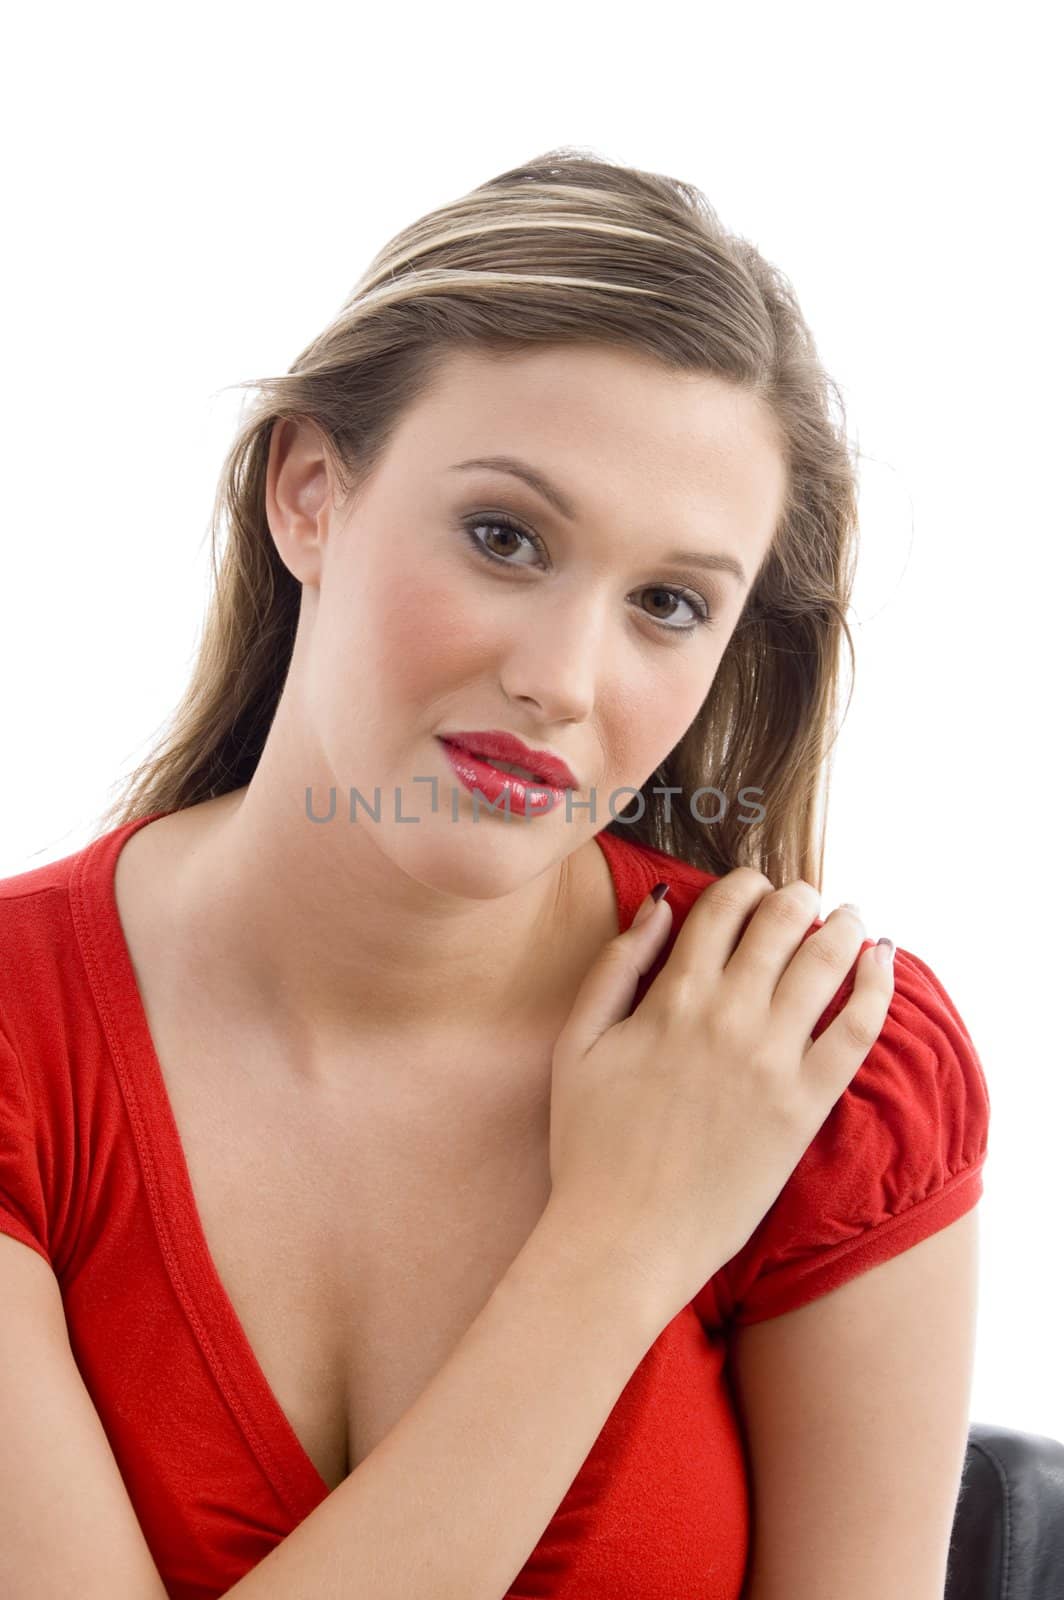 young woman looking at camera on an isolated white background